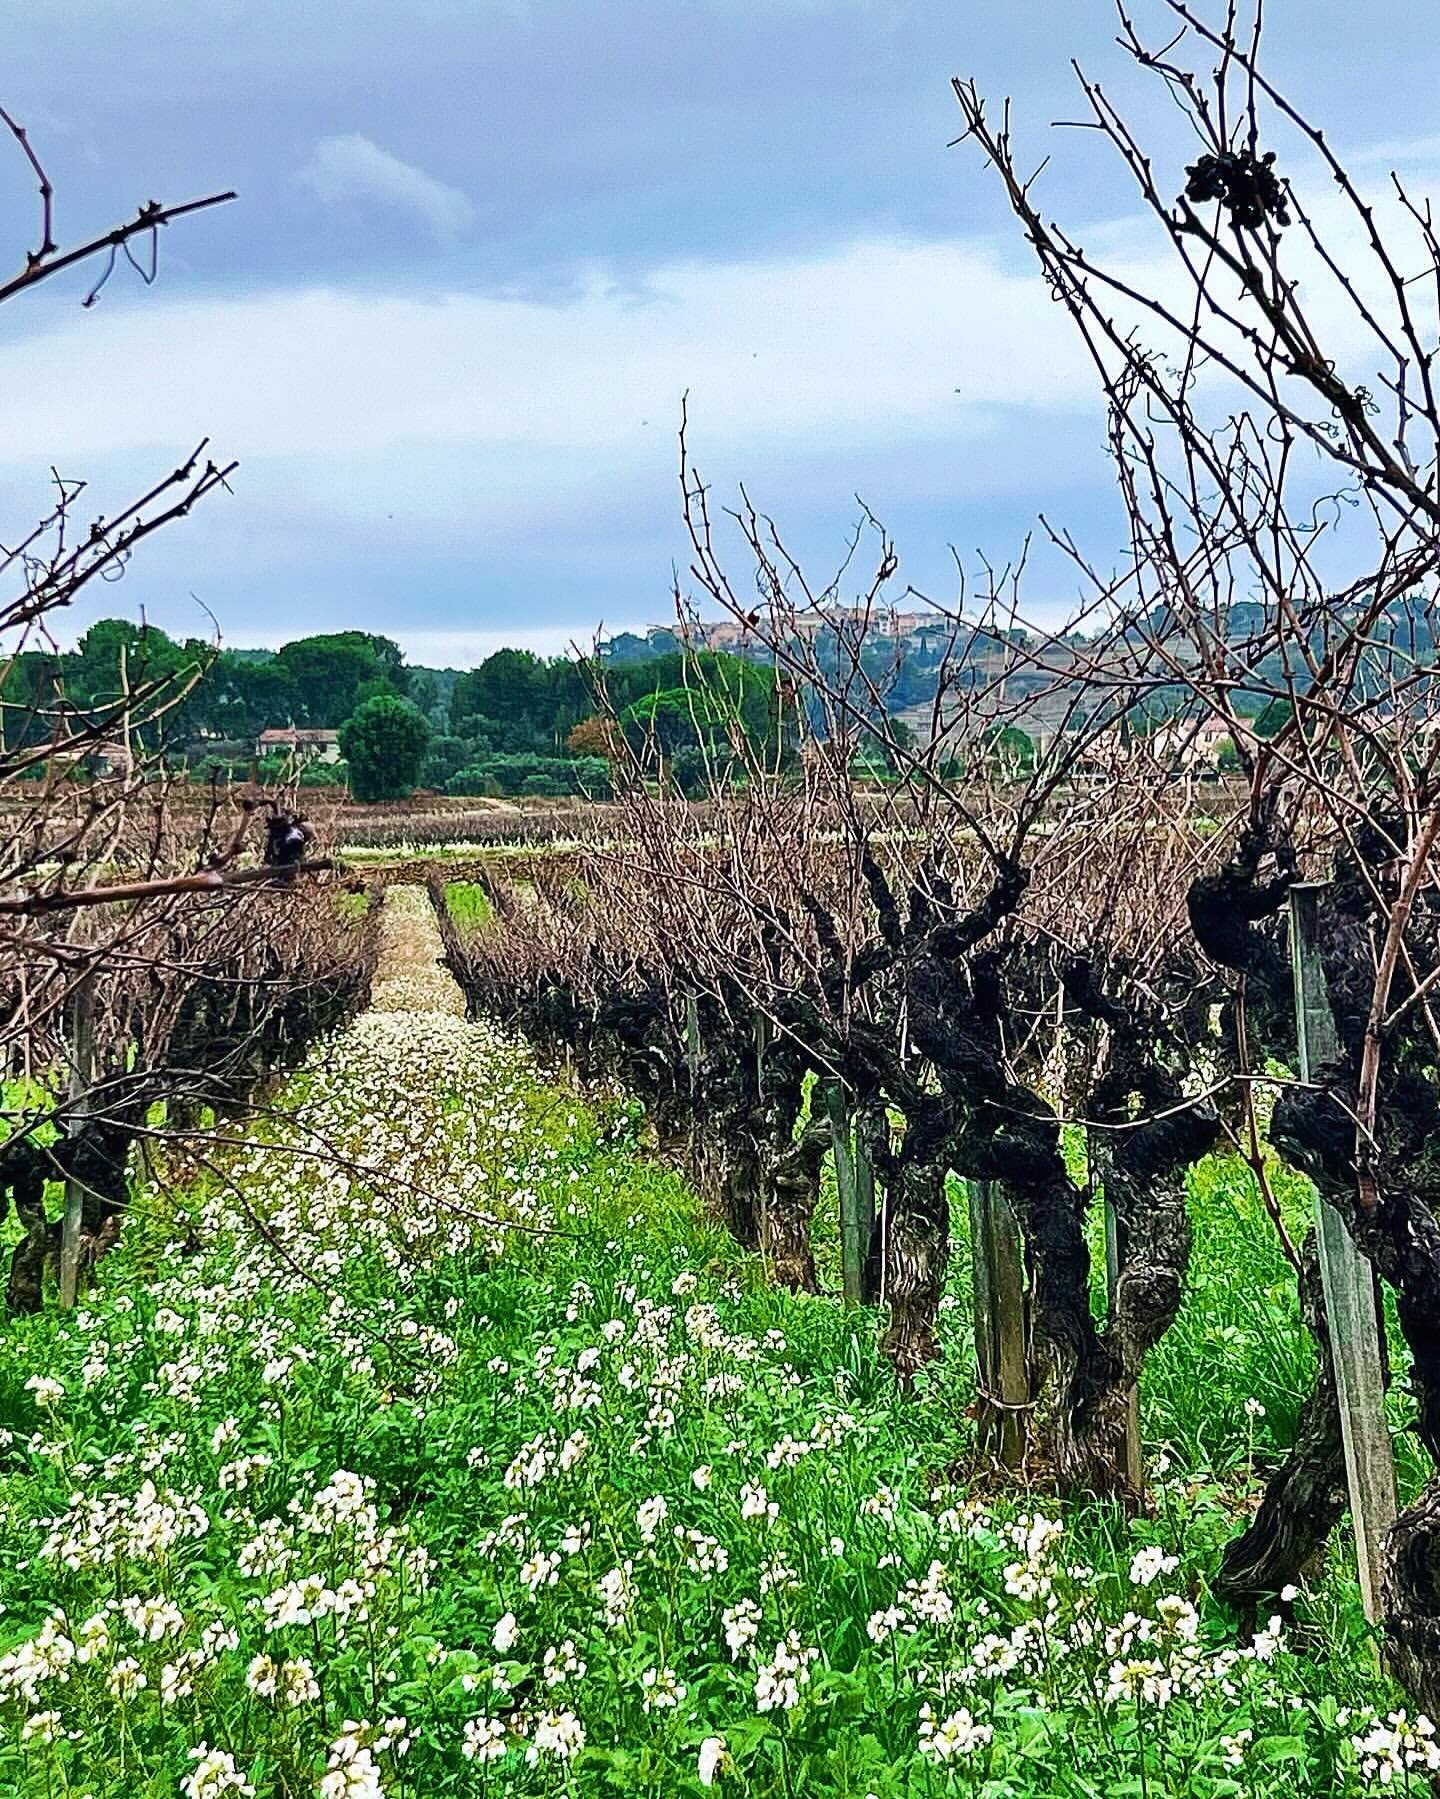 If only I could walk through the vineyards of @domaine_tempier and dream awhile. What a beautiful site!
.
If you&rsquo;re in the Chicagoland area, ask your local wine cellar to connect with the incredible team over at @maverickbevillinois to source s